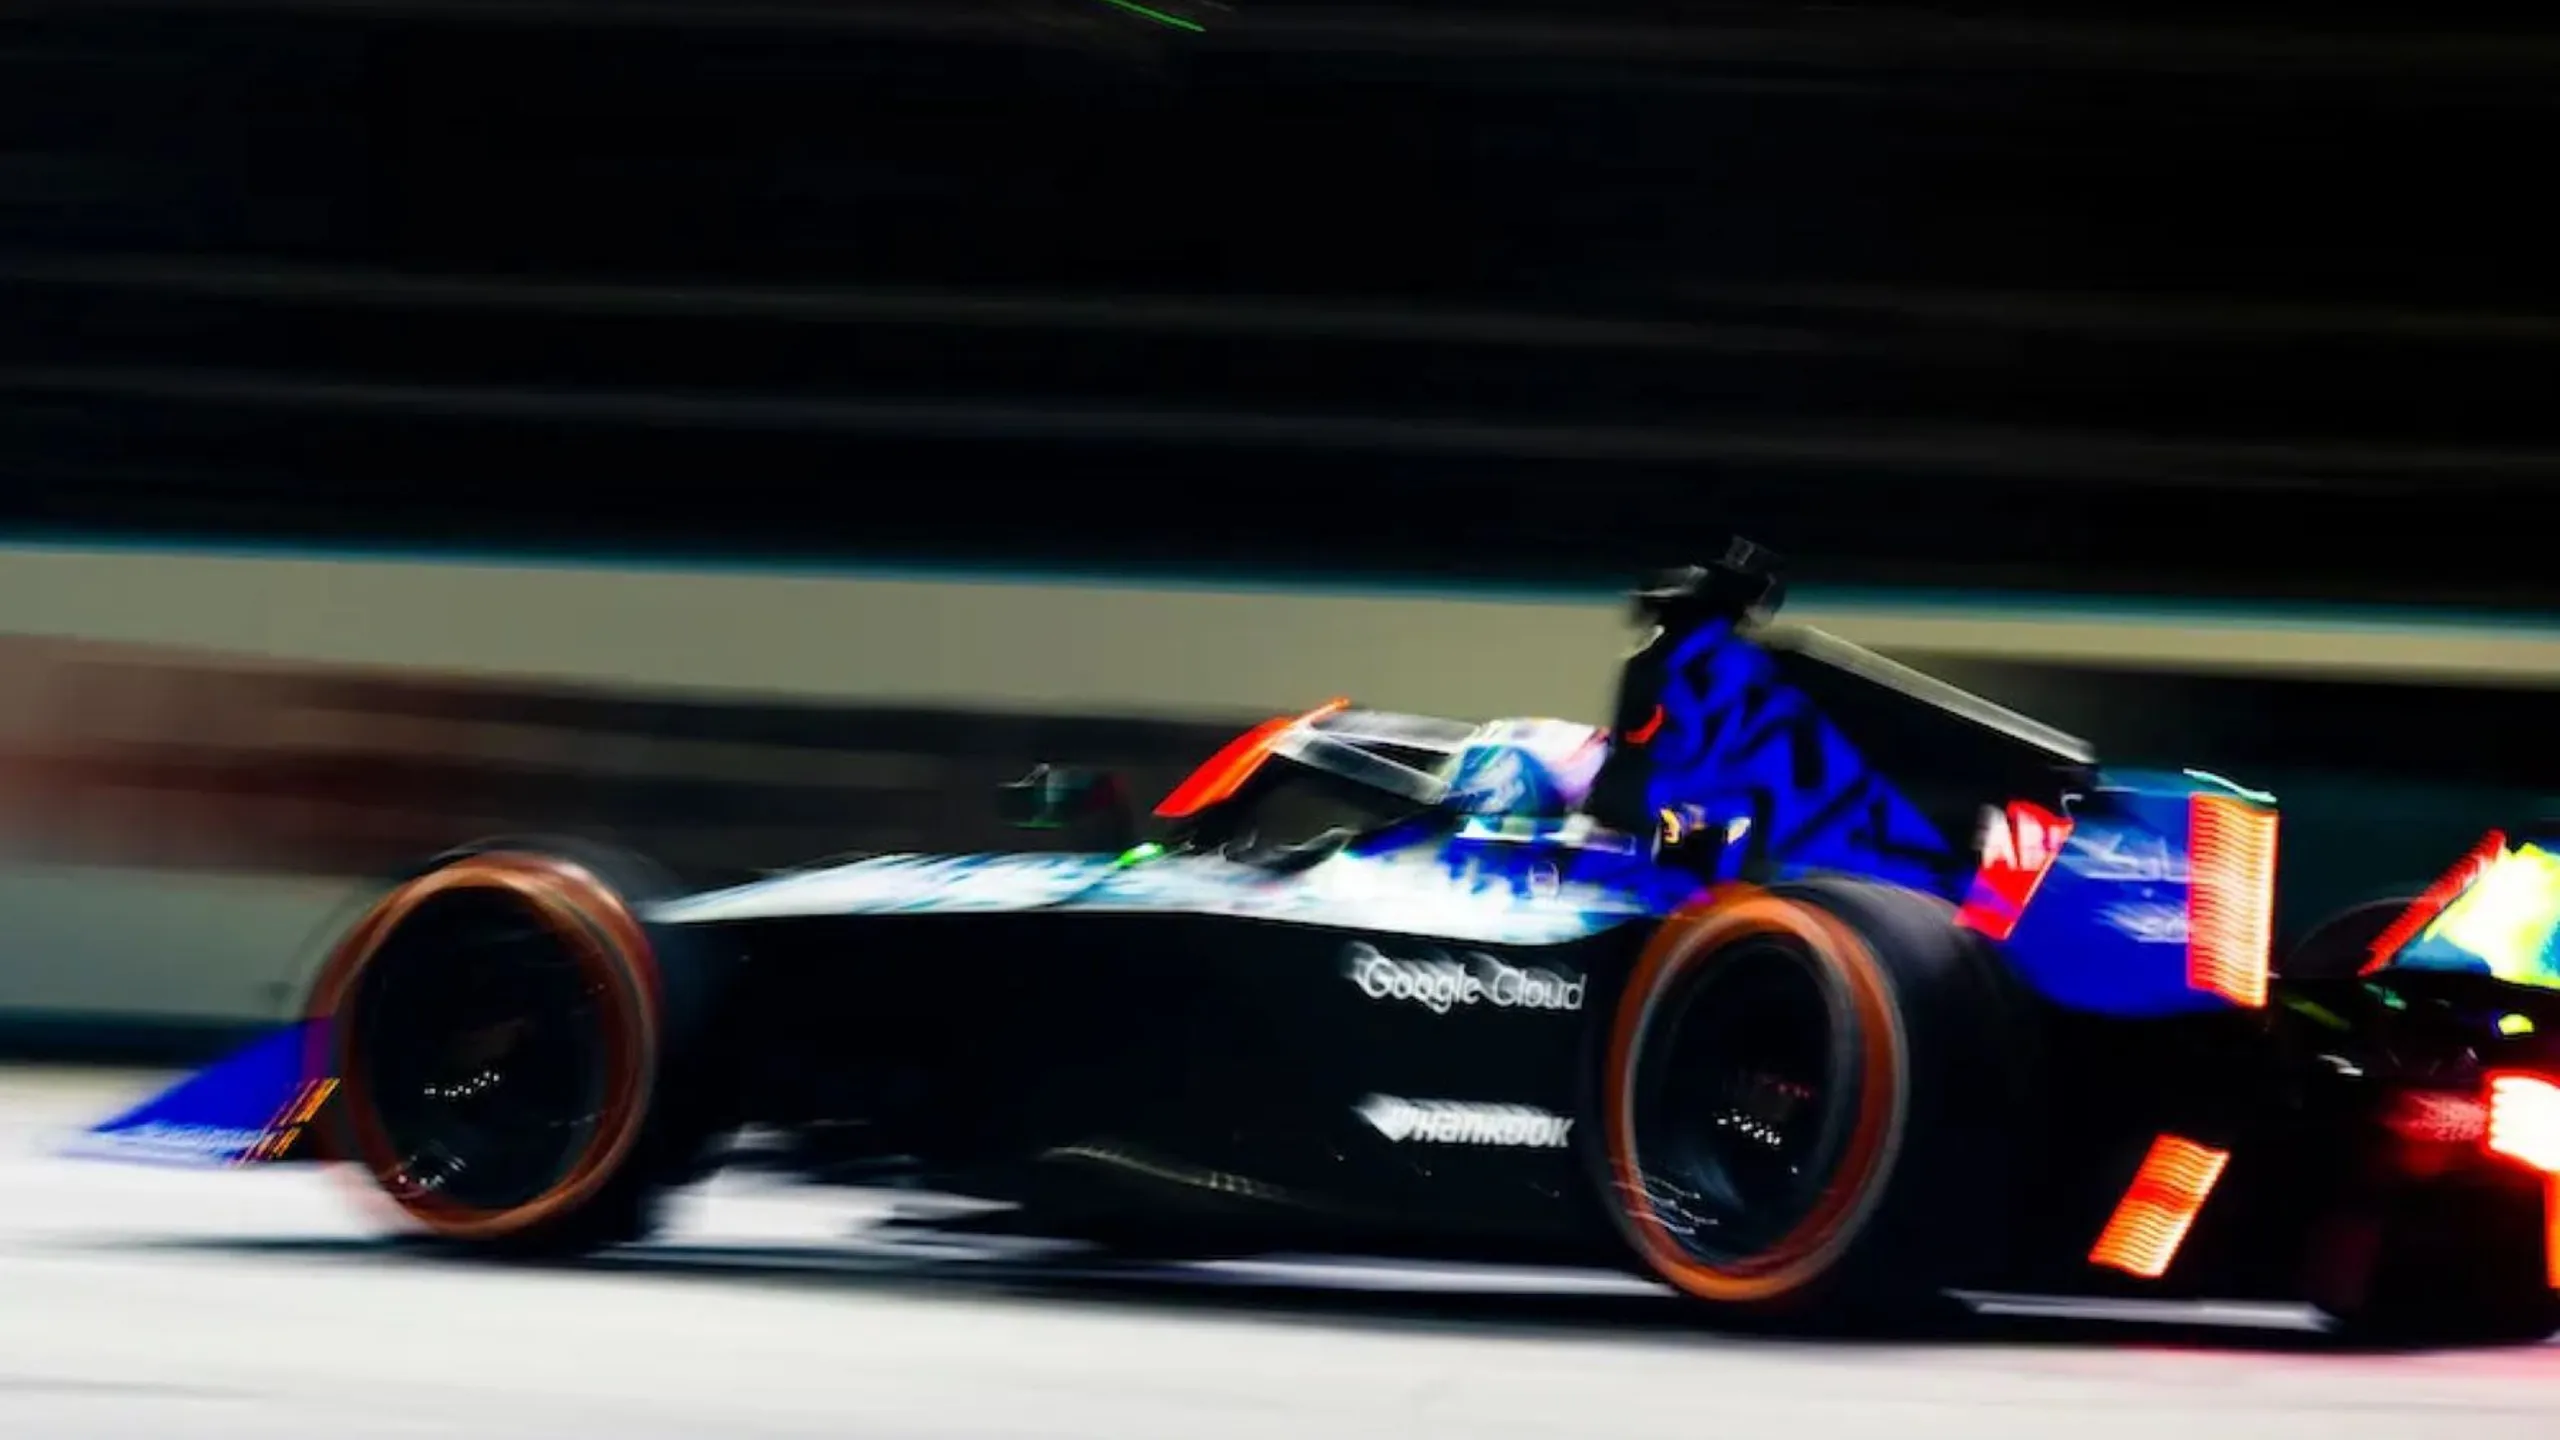 Google Cloud partners with Formula E in new technology collaboration